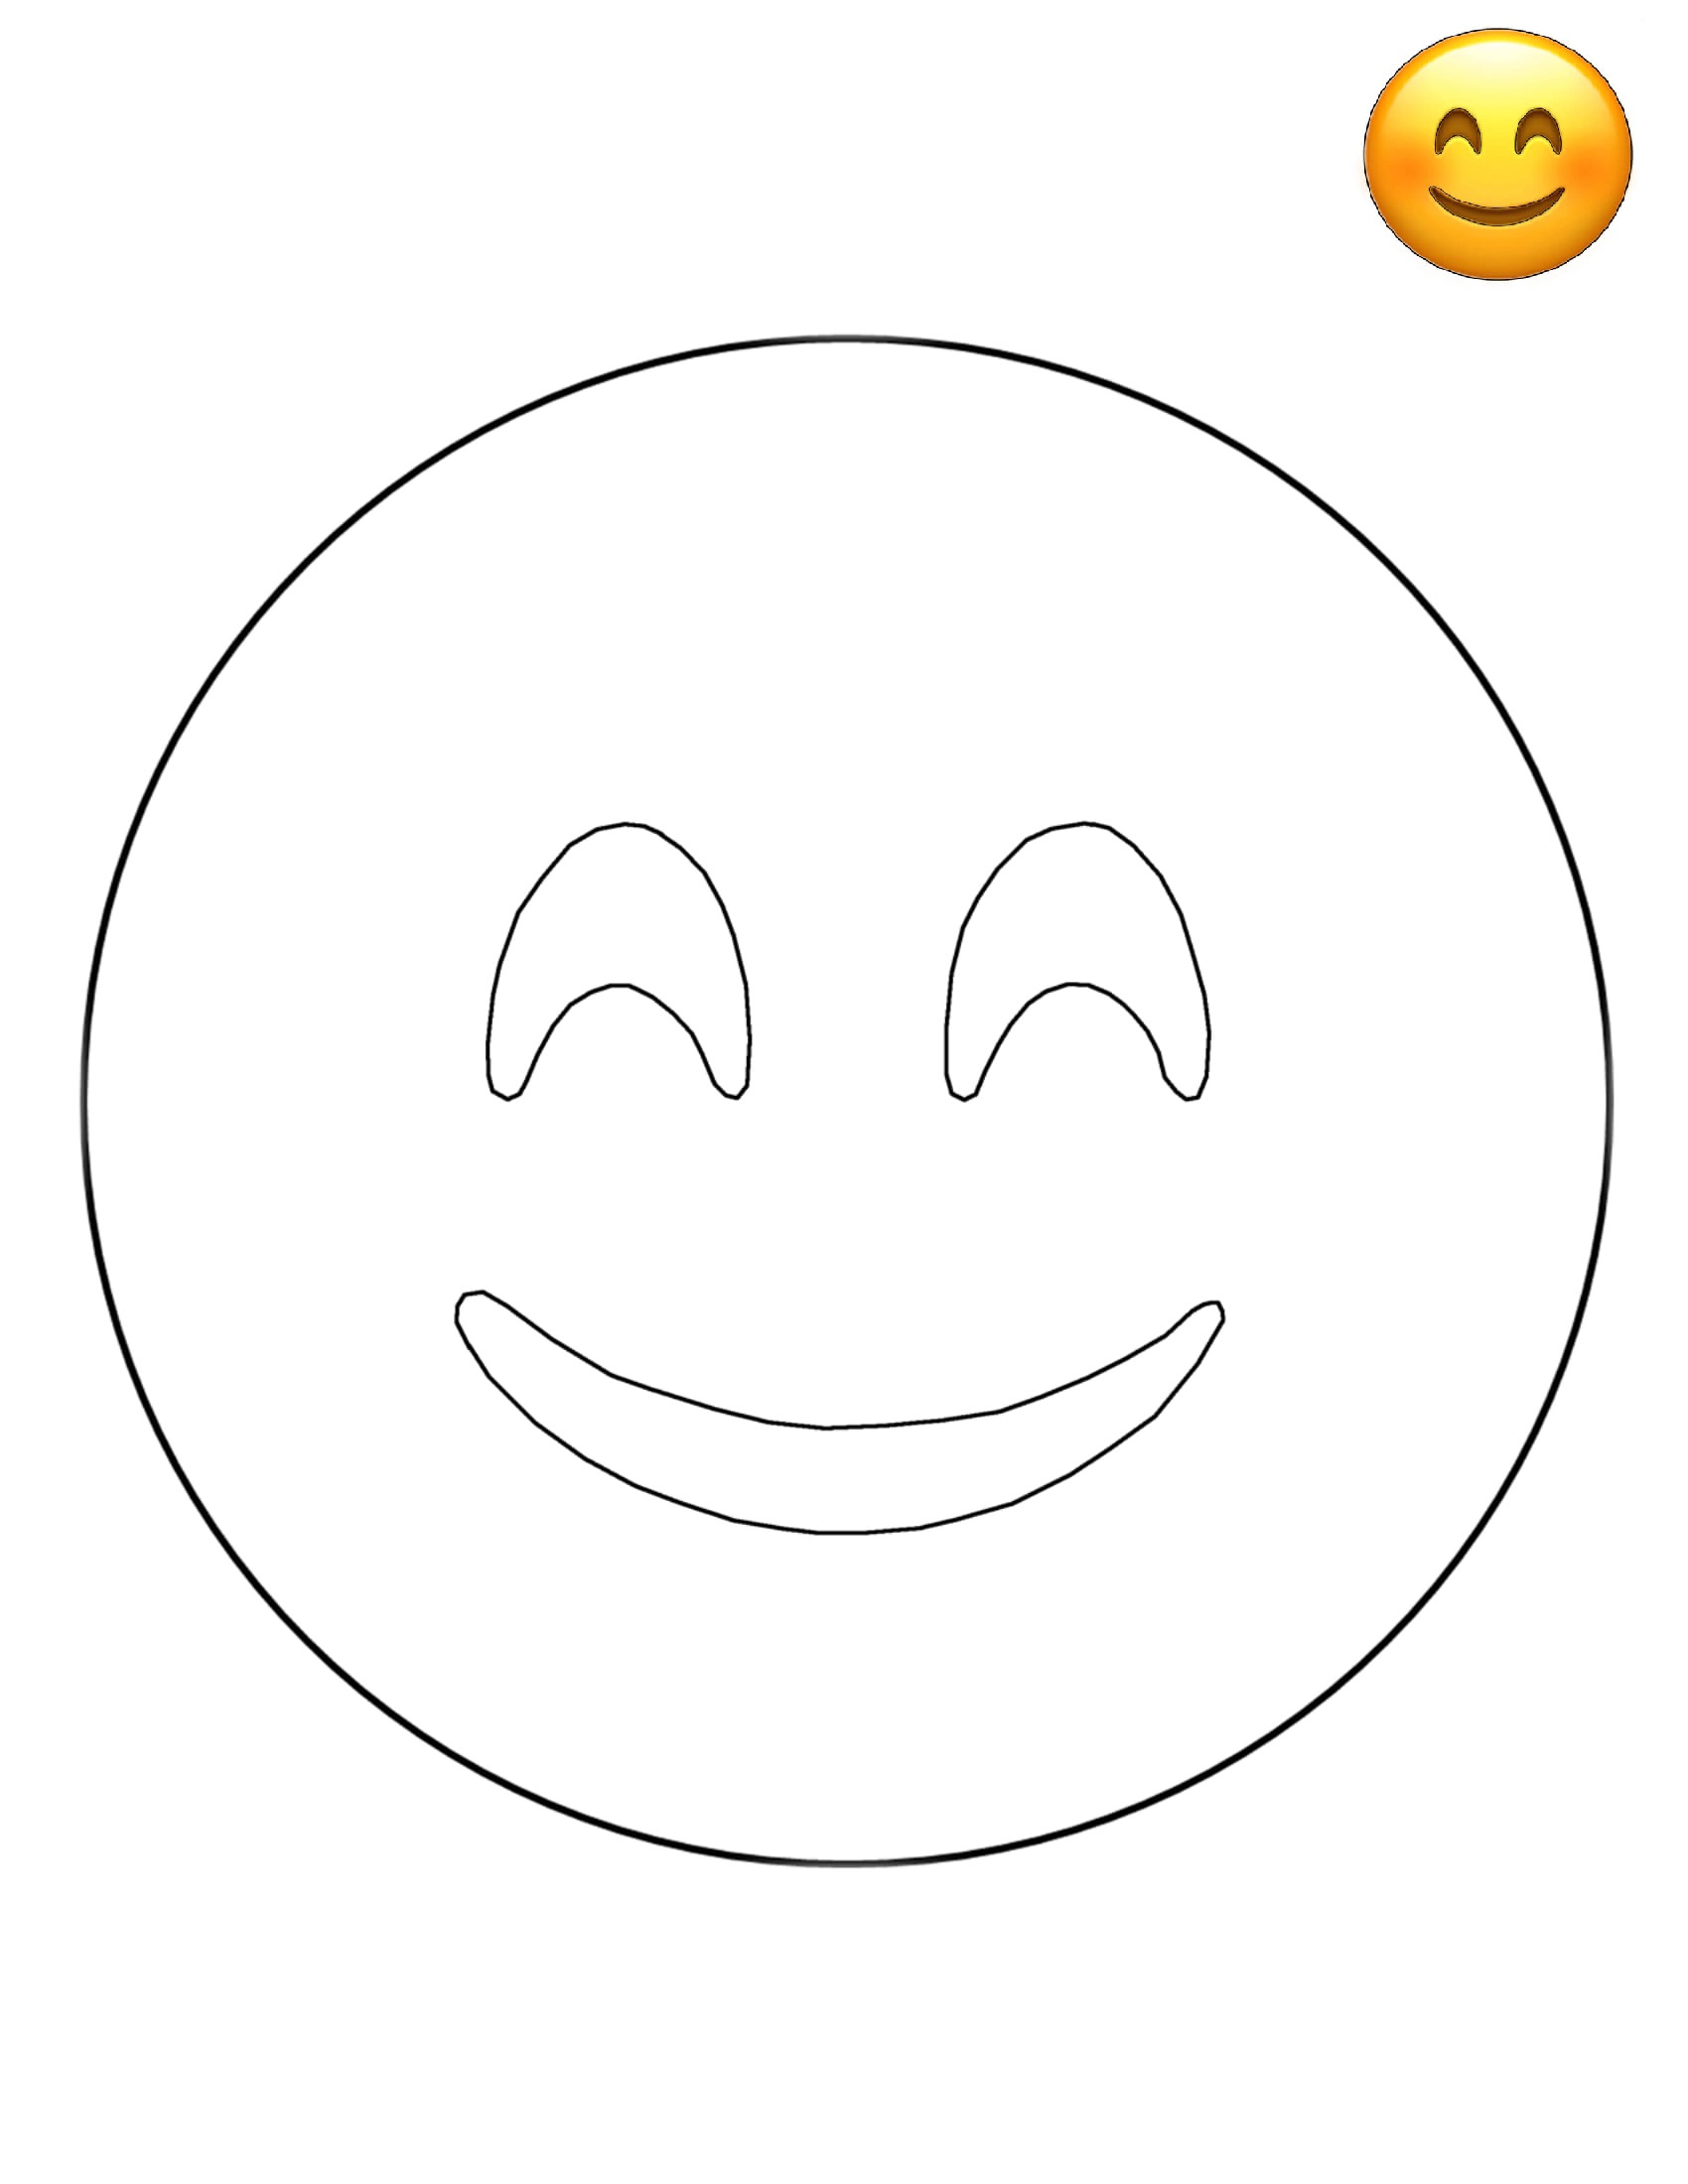 Emoji Smiley Face Free Sheets Coloring Page